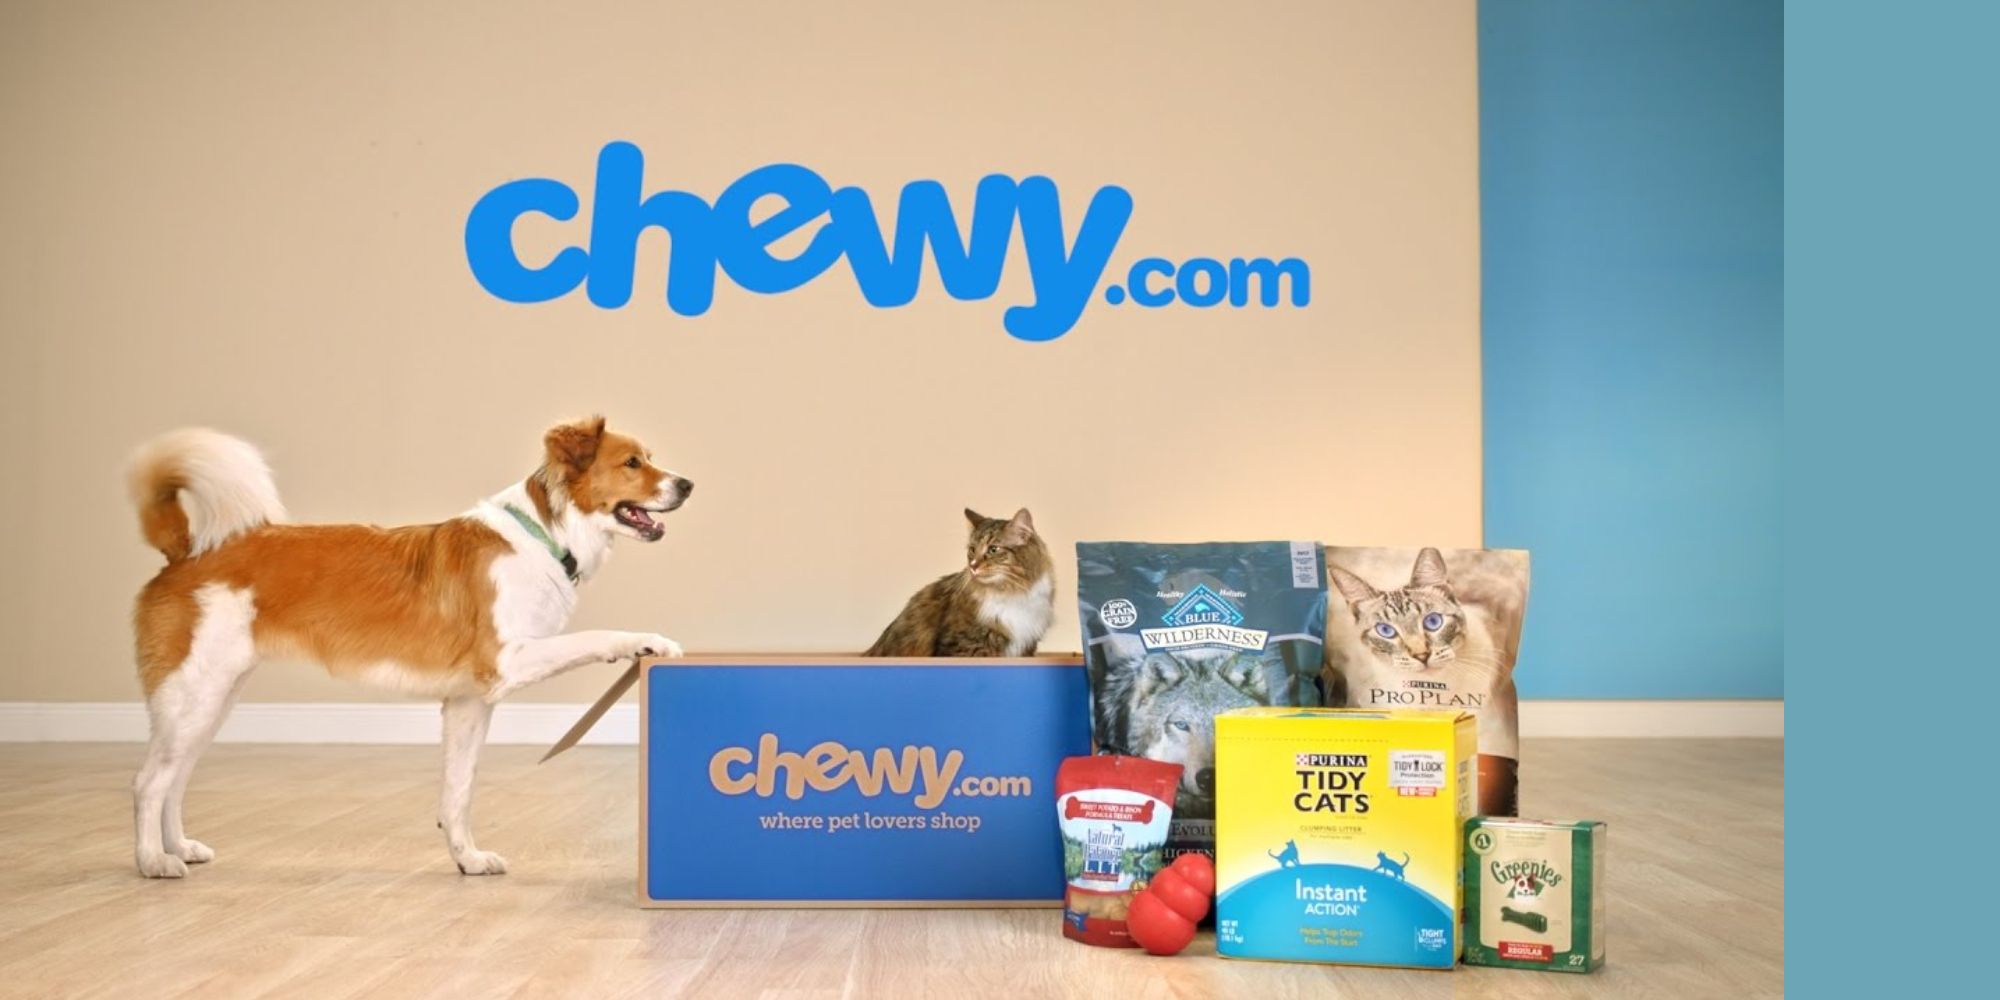 An advertisement for Chewy.com. A cat and dog pose next to pet supplies, foot and cat litter. A shipping box says, "chewy.com."